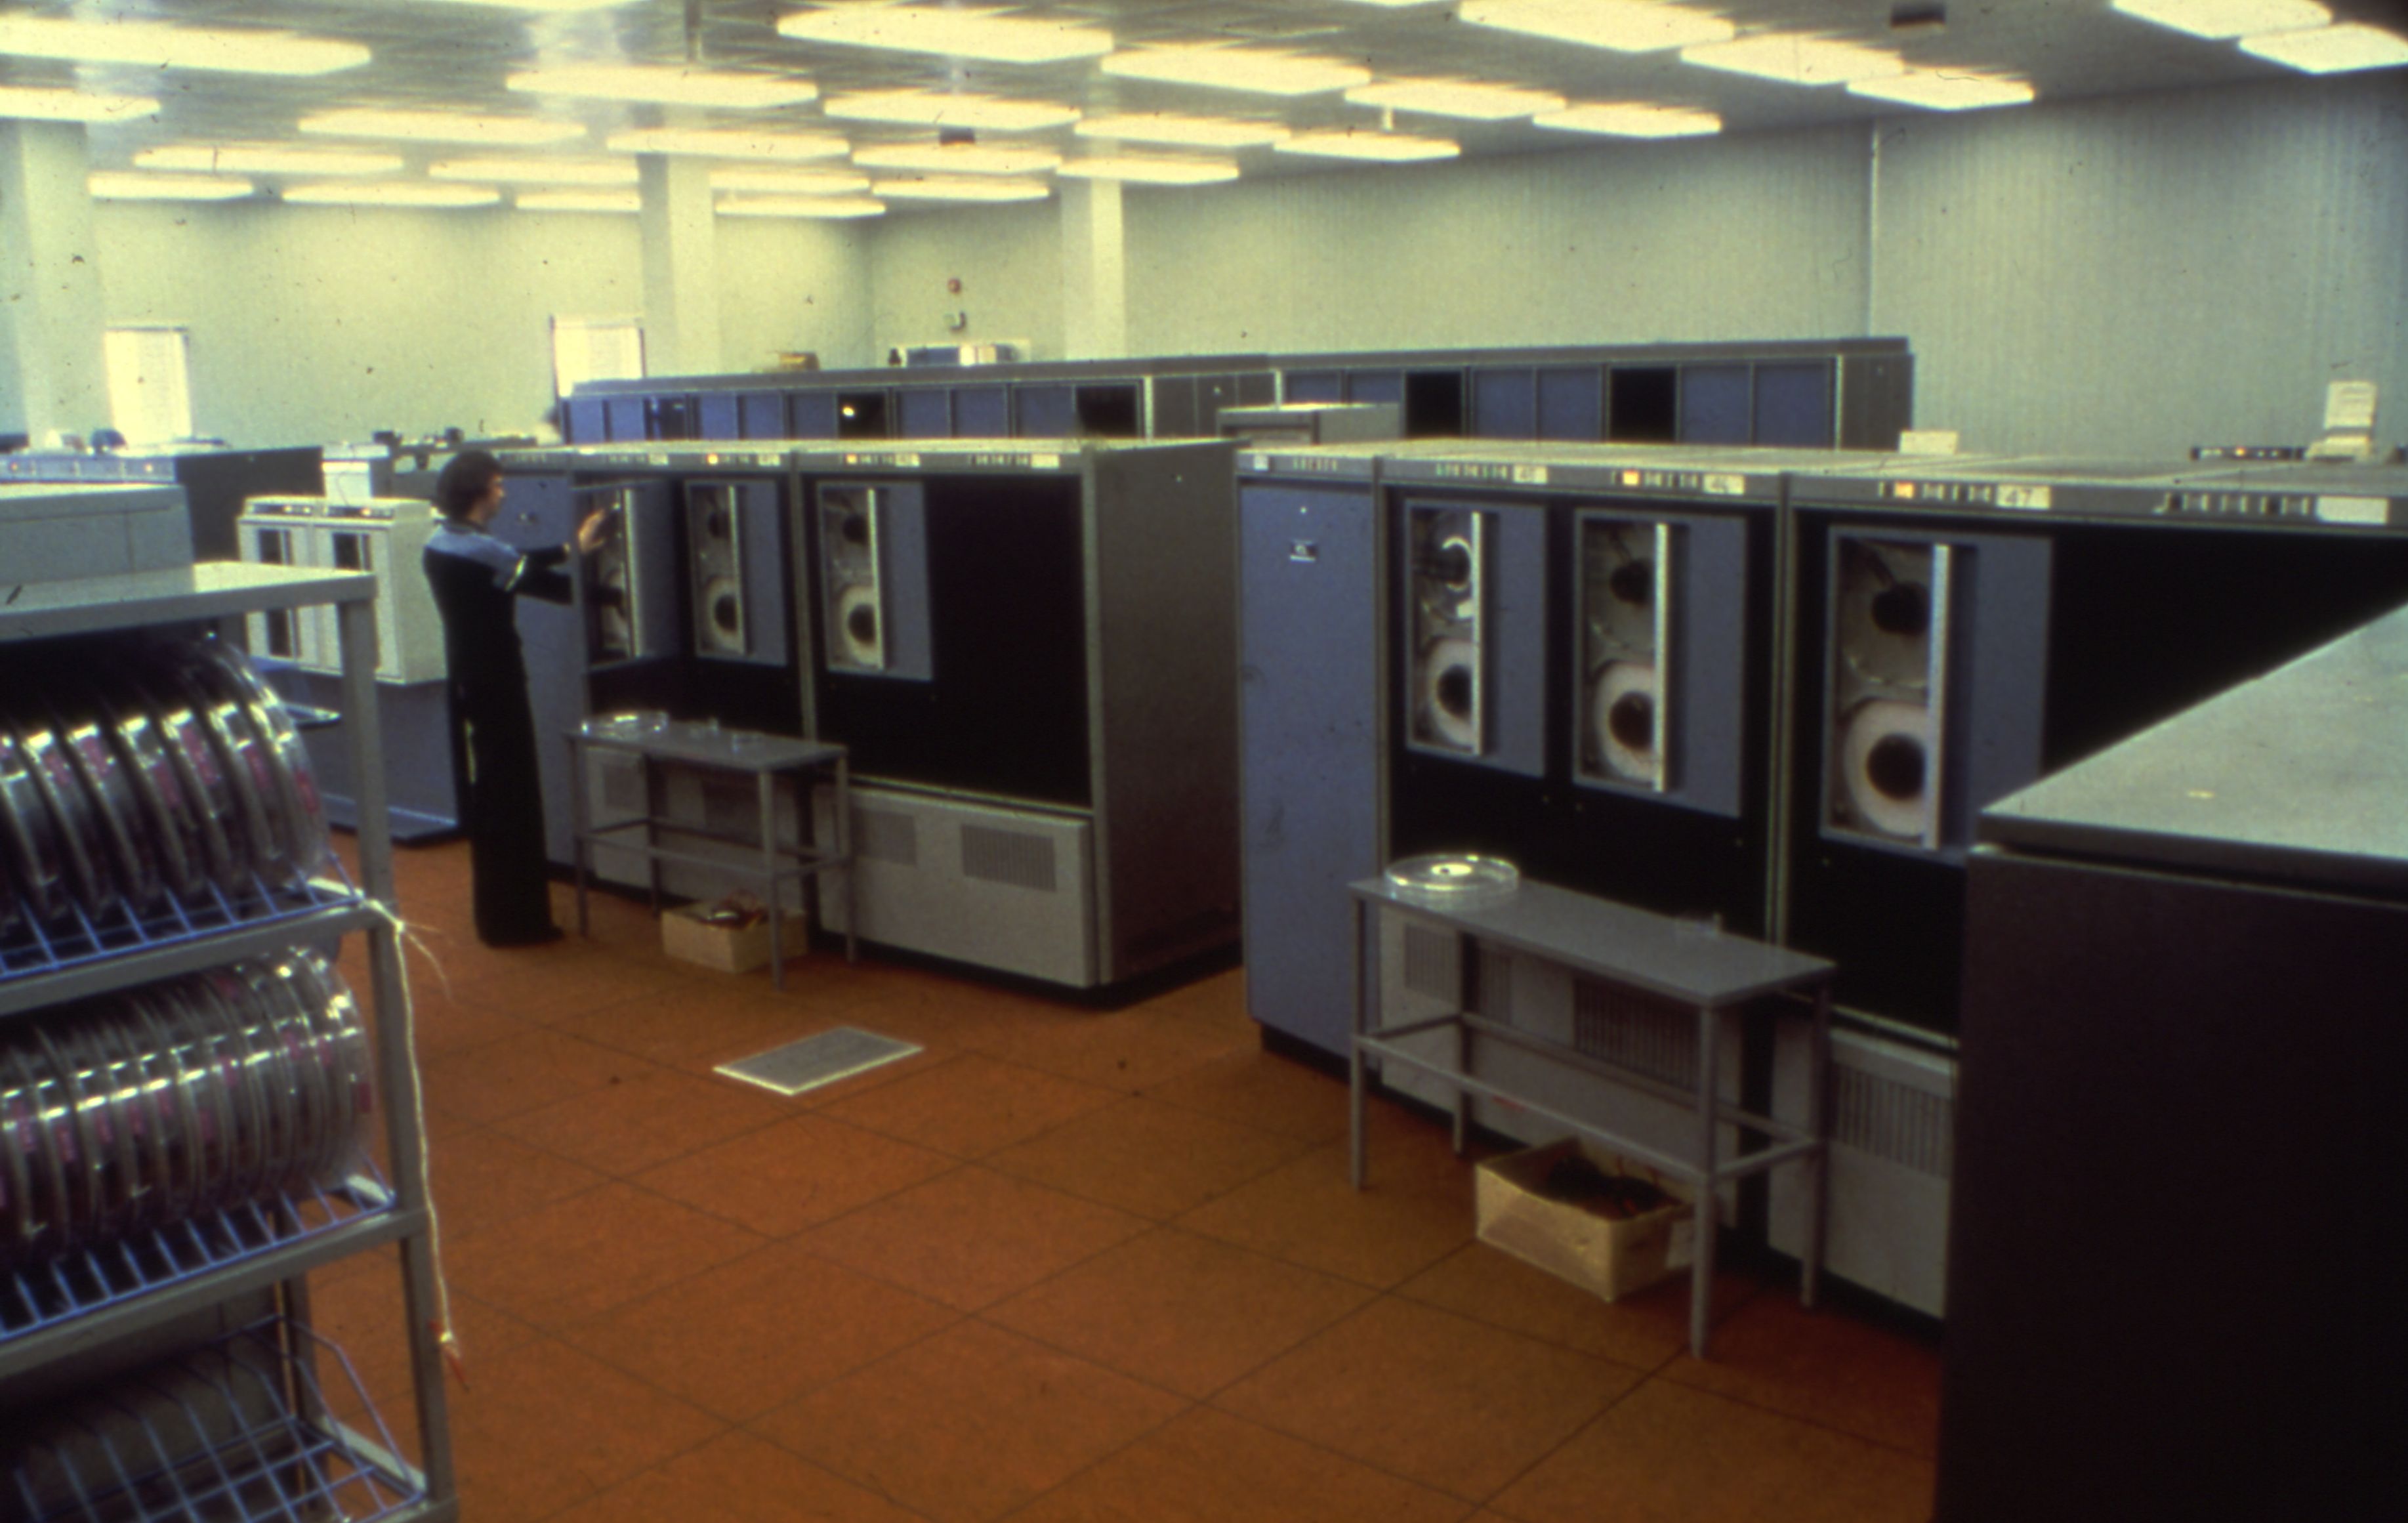 W407 computer room with ICL mainframe equipment.